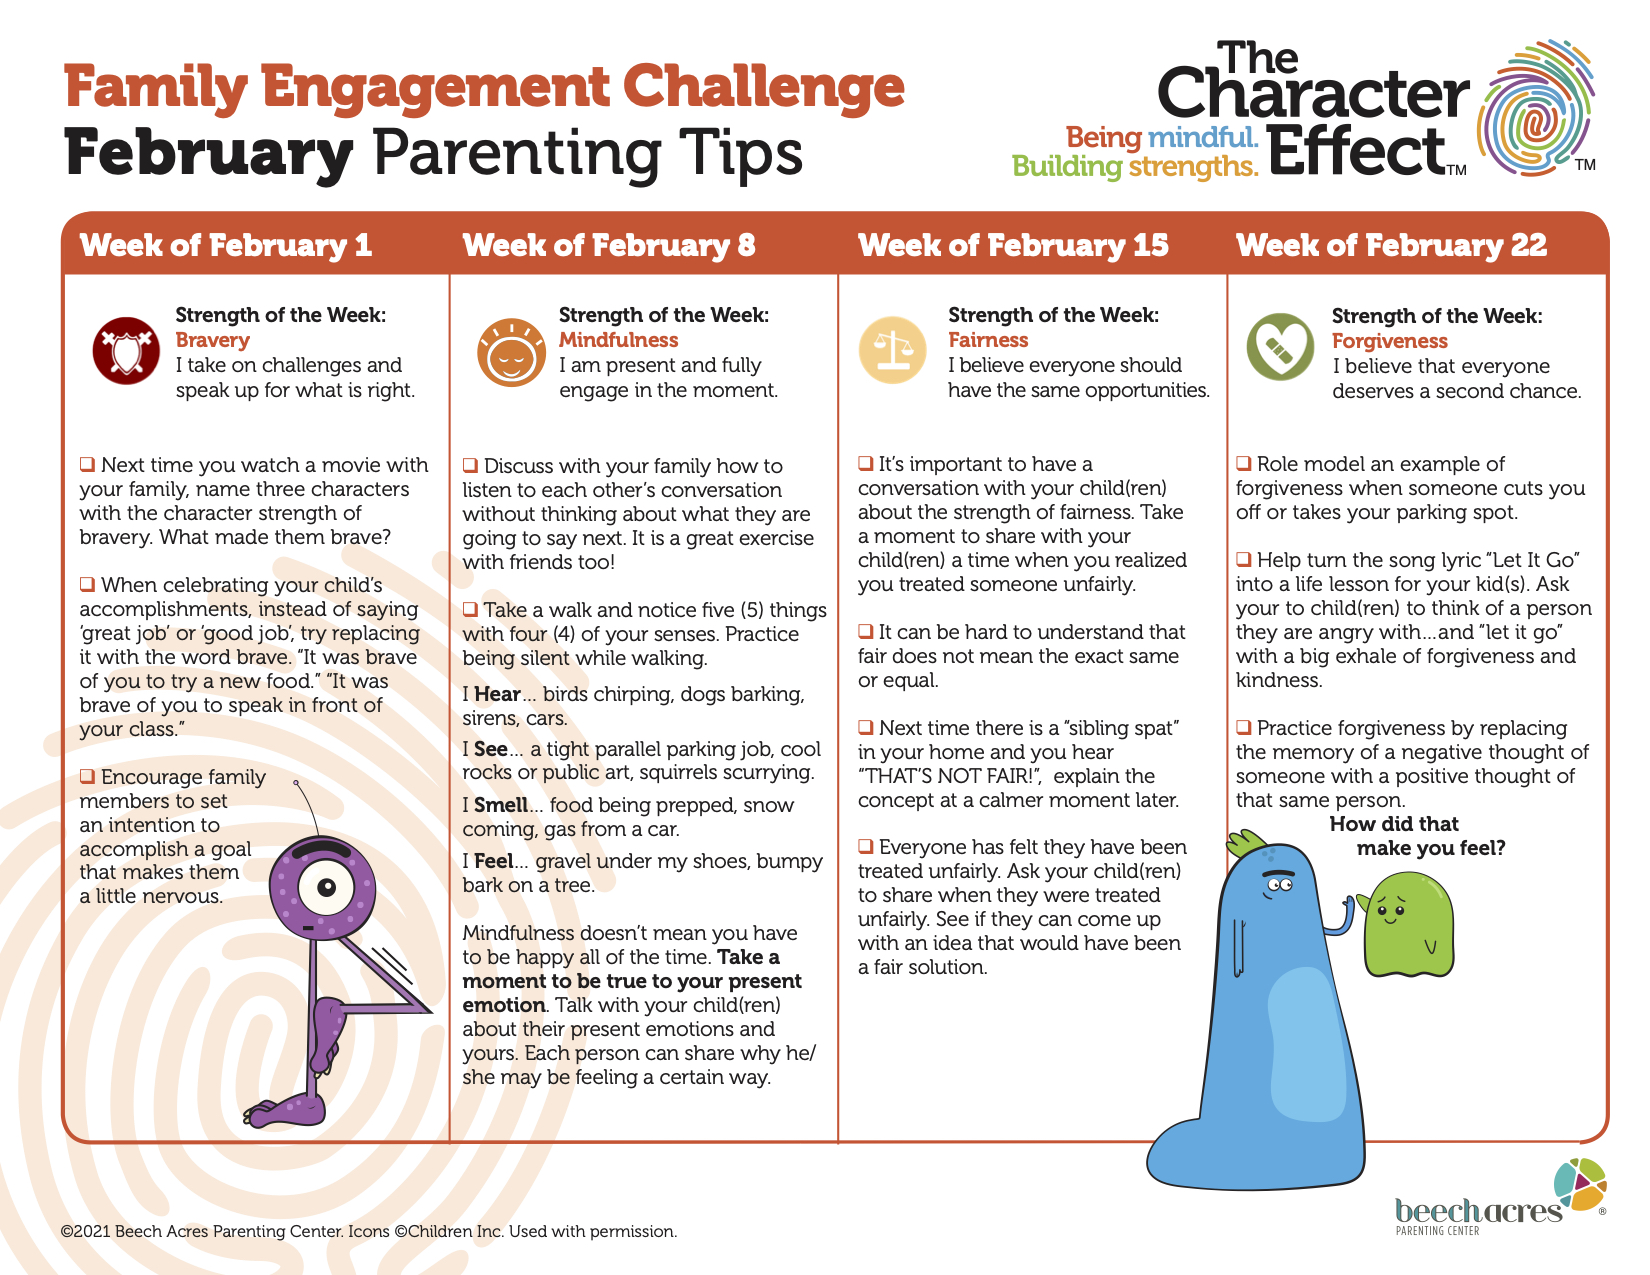 February Family Engagement Challenge From The Character Effect™